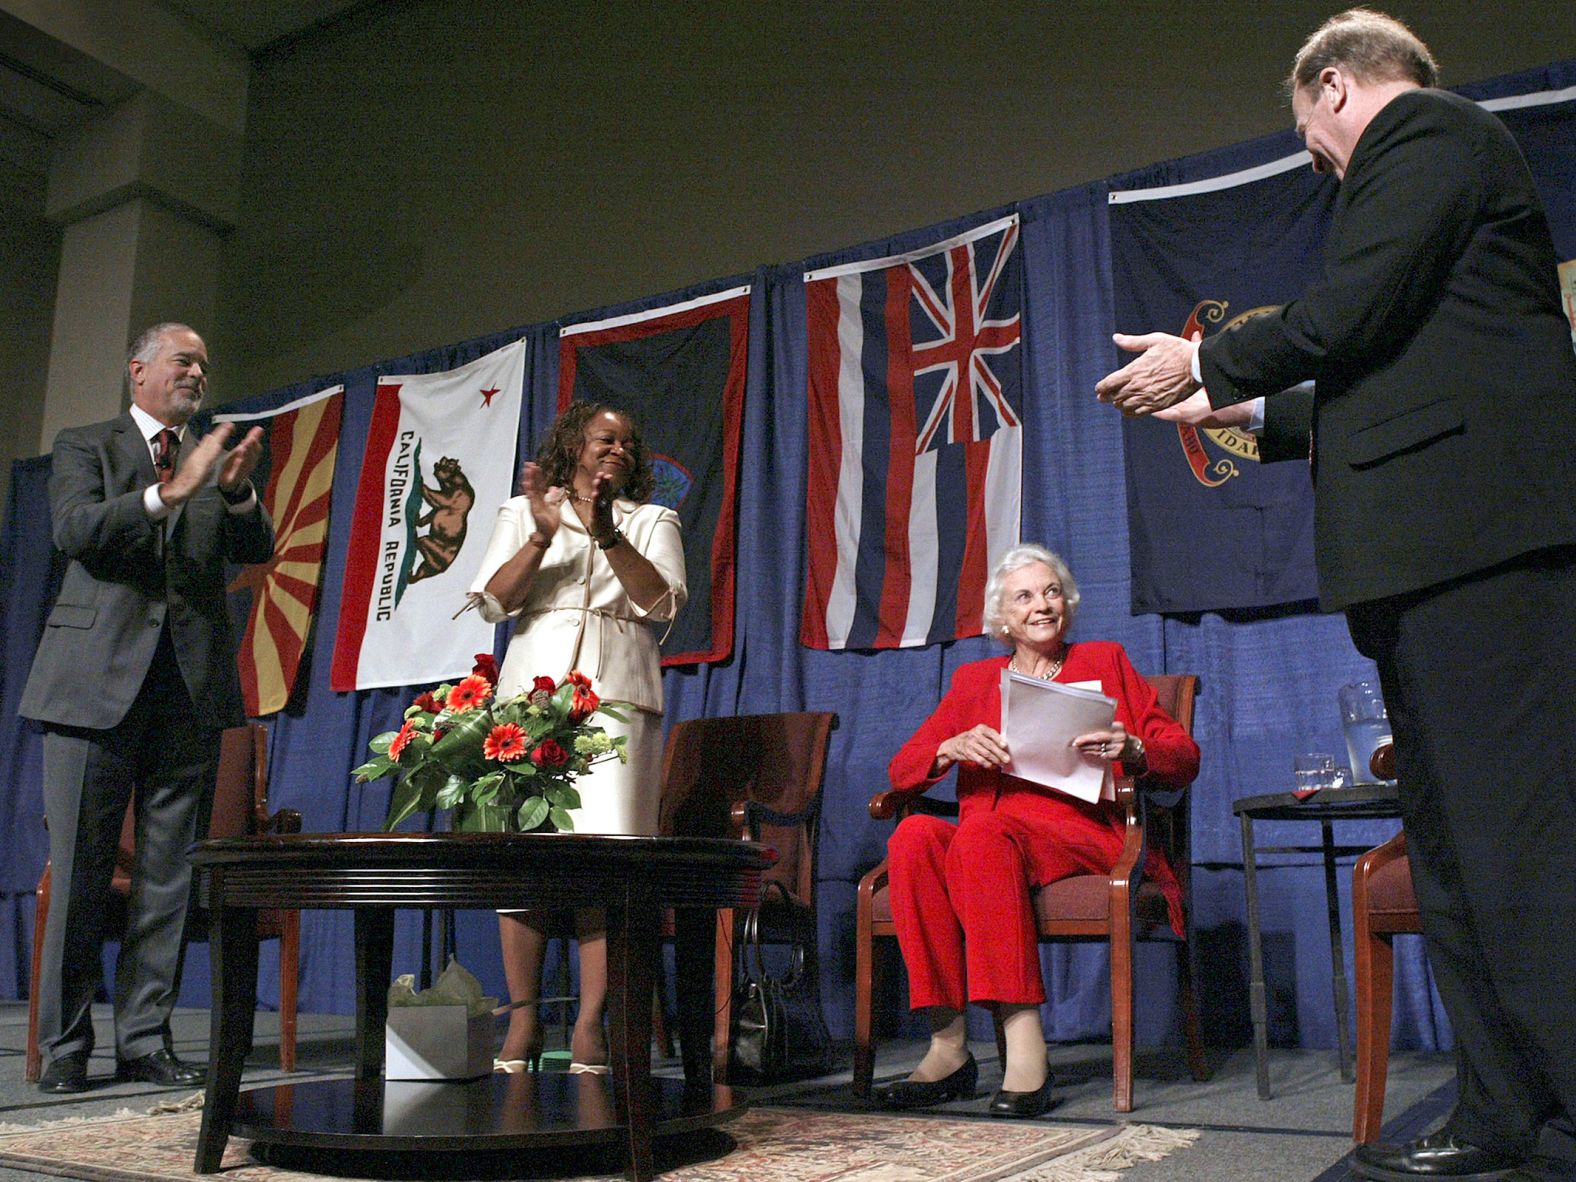 O'Connor receives applause after she spoke at a judicial conference in Spokane, Washington, in 2005. This was a few weeks after she announced that she would be retiring from the court to care for her husband, who was ailing from Alzheimer's disease.